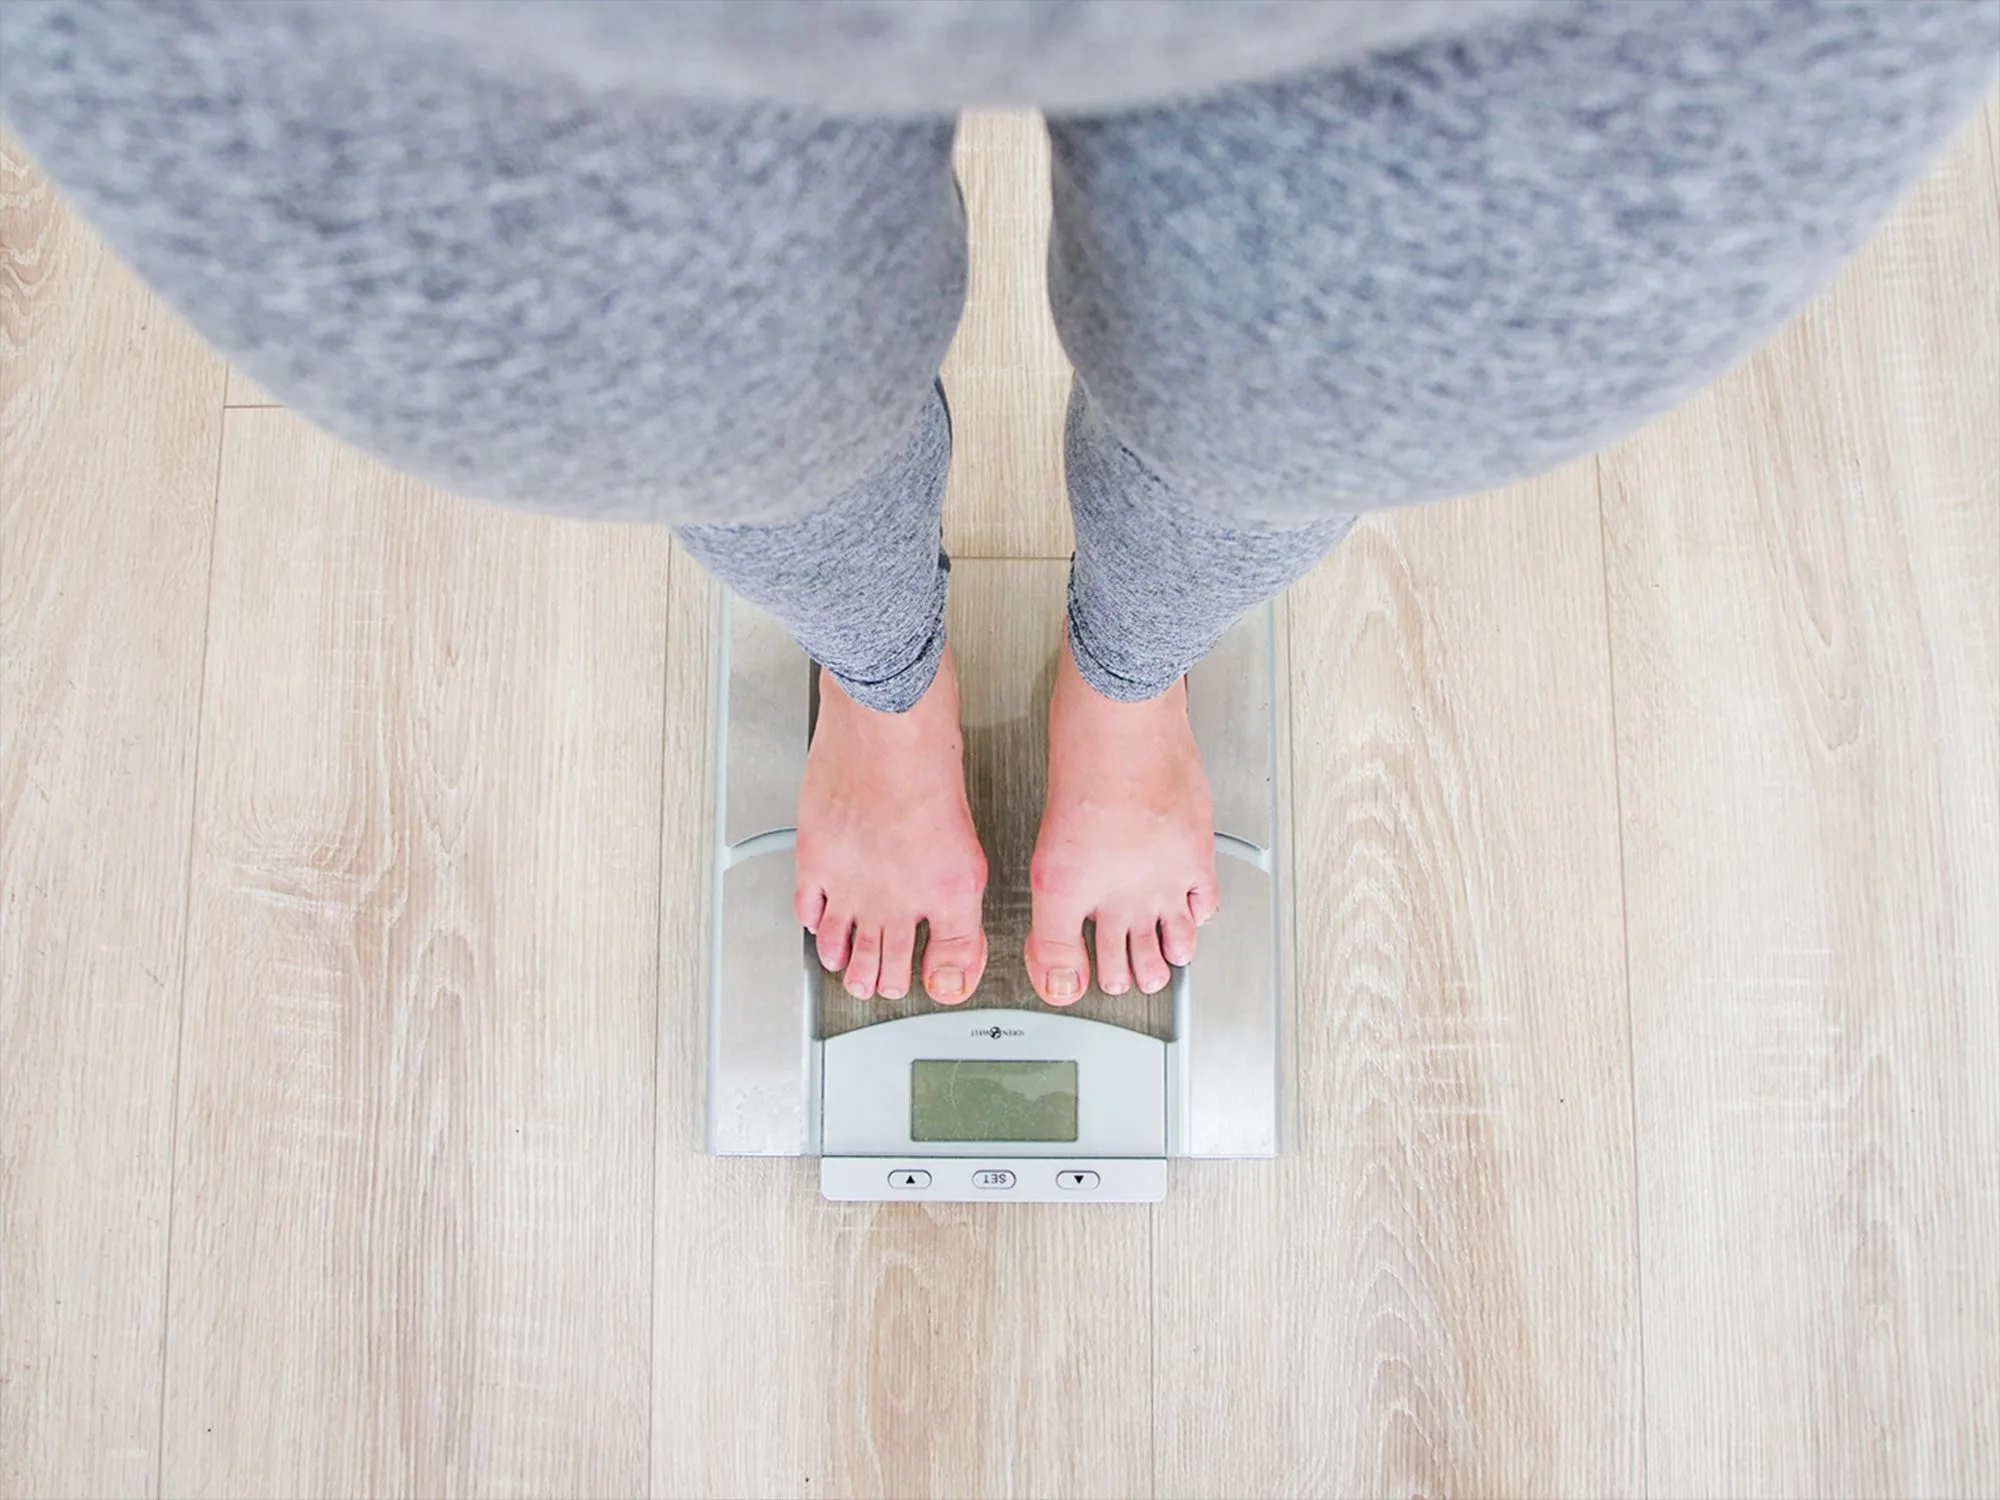 Here Are 11 Reasons To Explain That Sudden Weight Gain